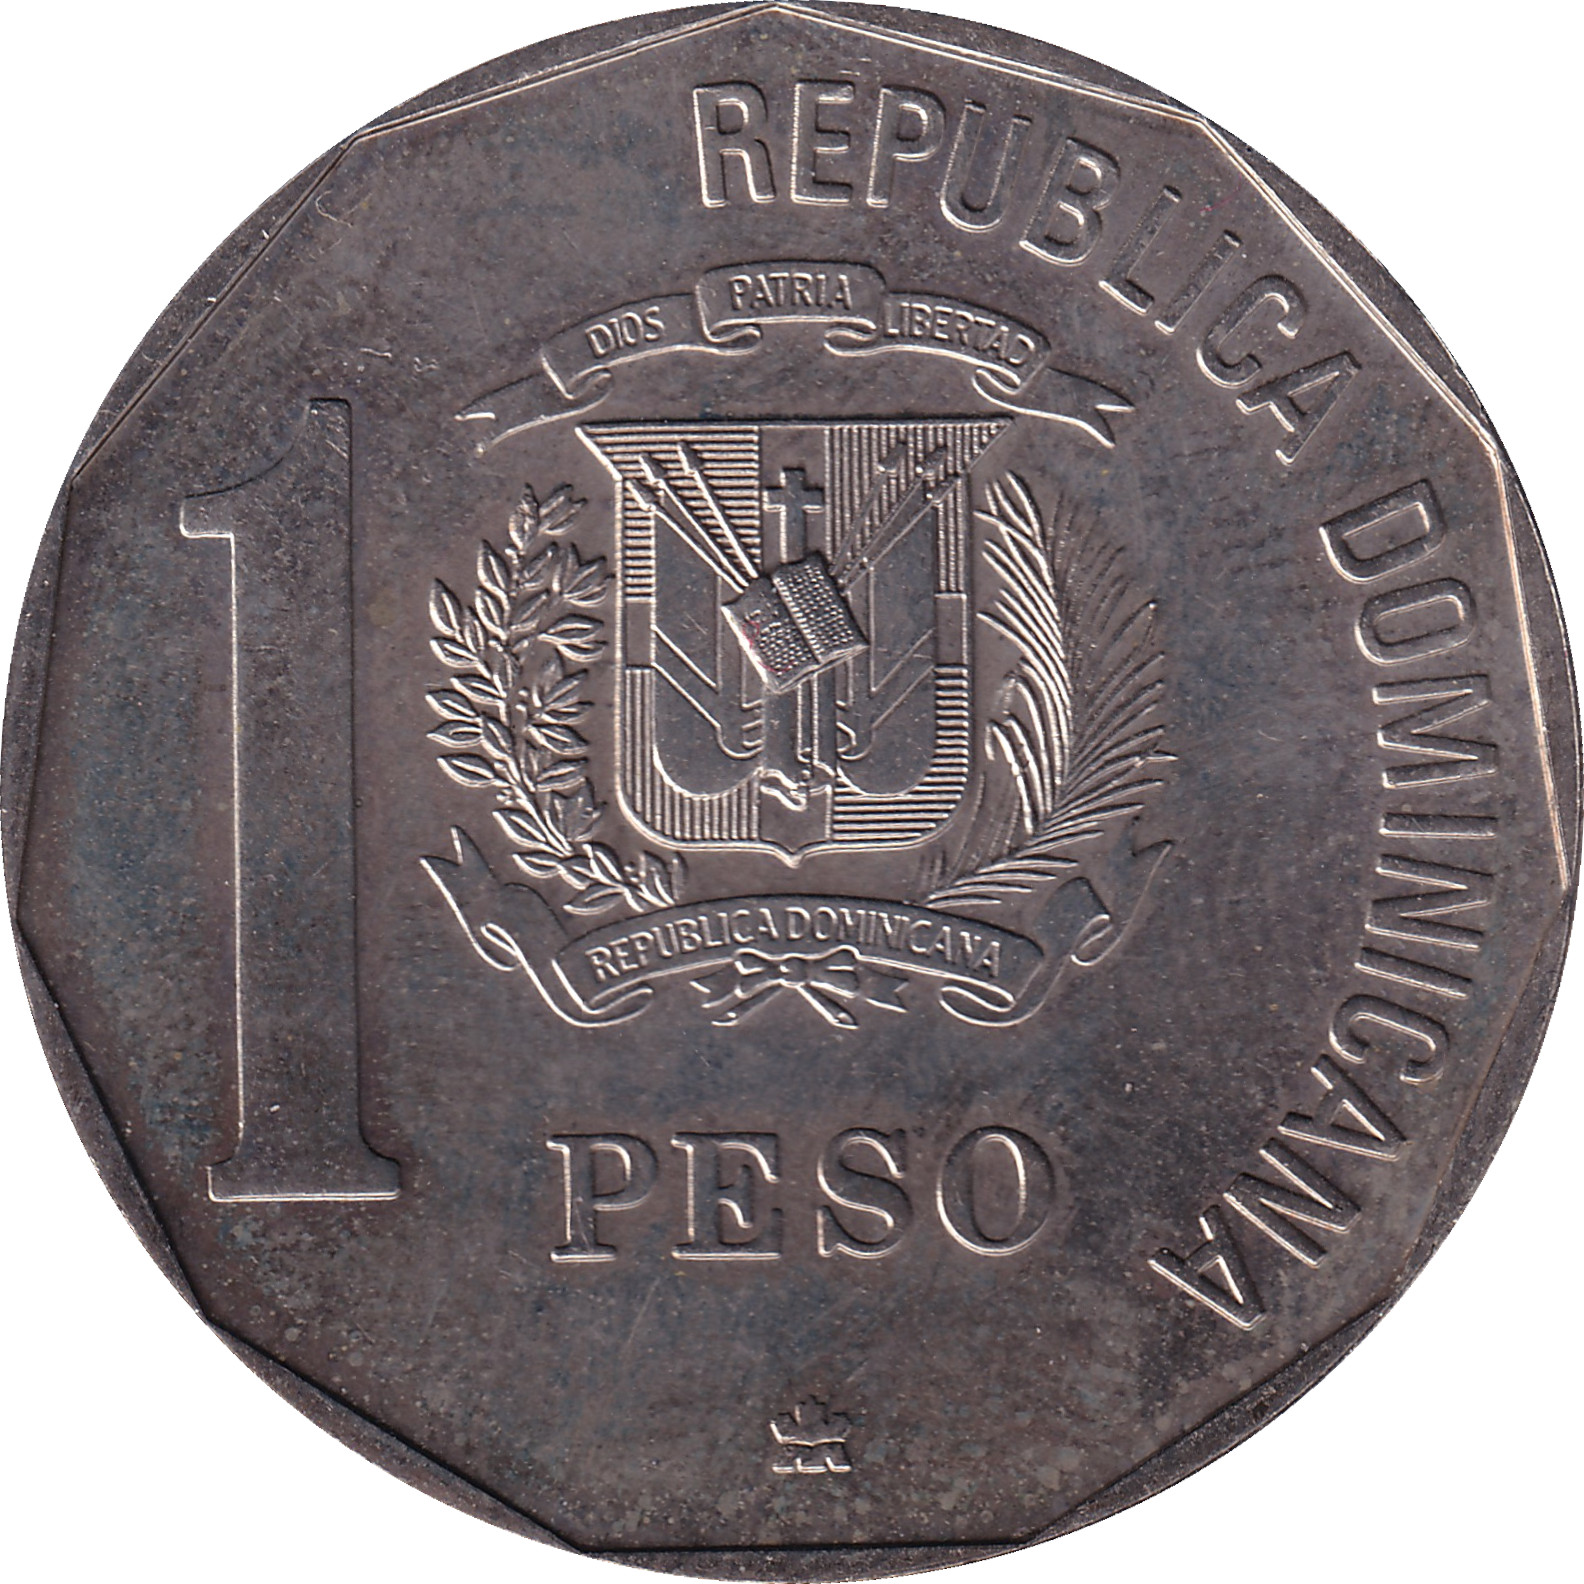 1 peso - Découverte - 500 years